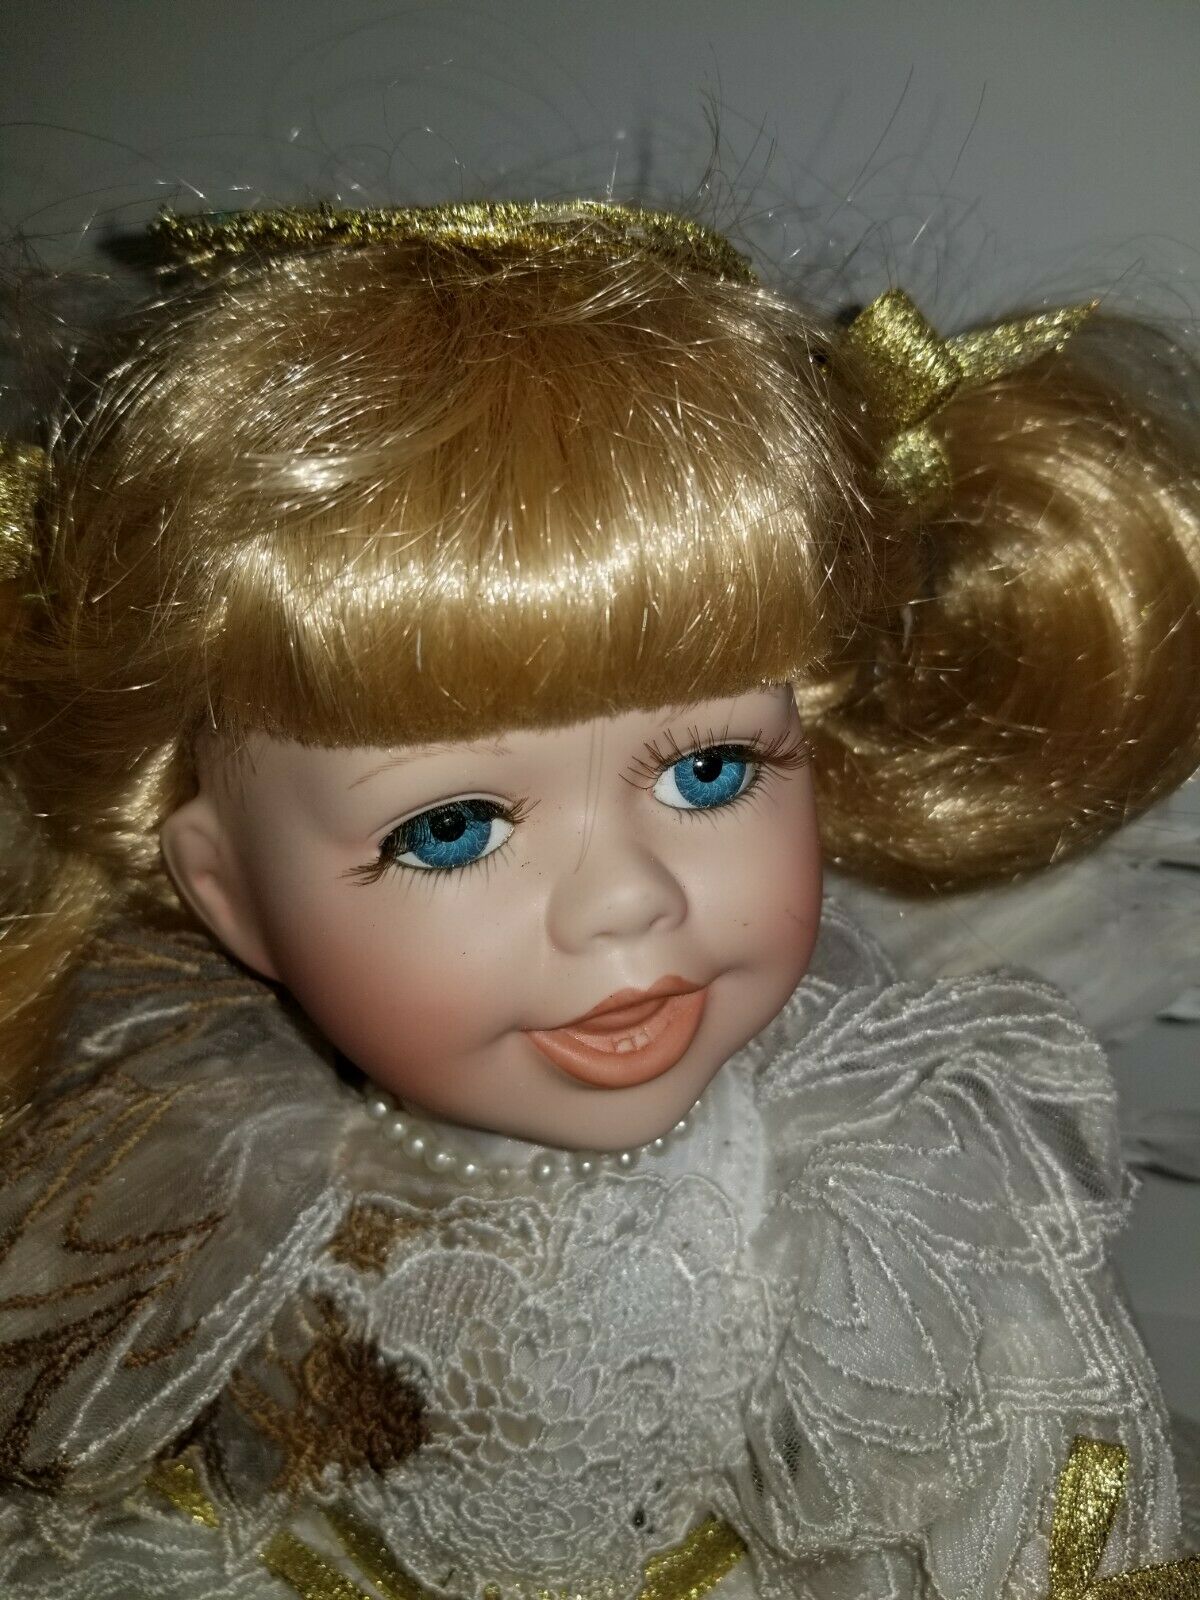 Baby's Dream Angel Doll Handcrafted Bisque Porcelain Doll